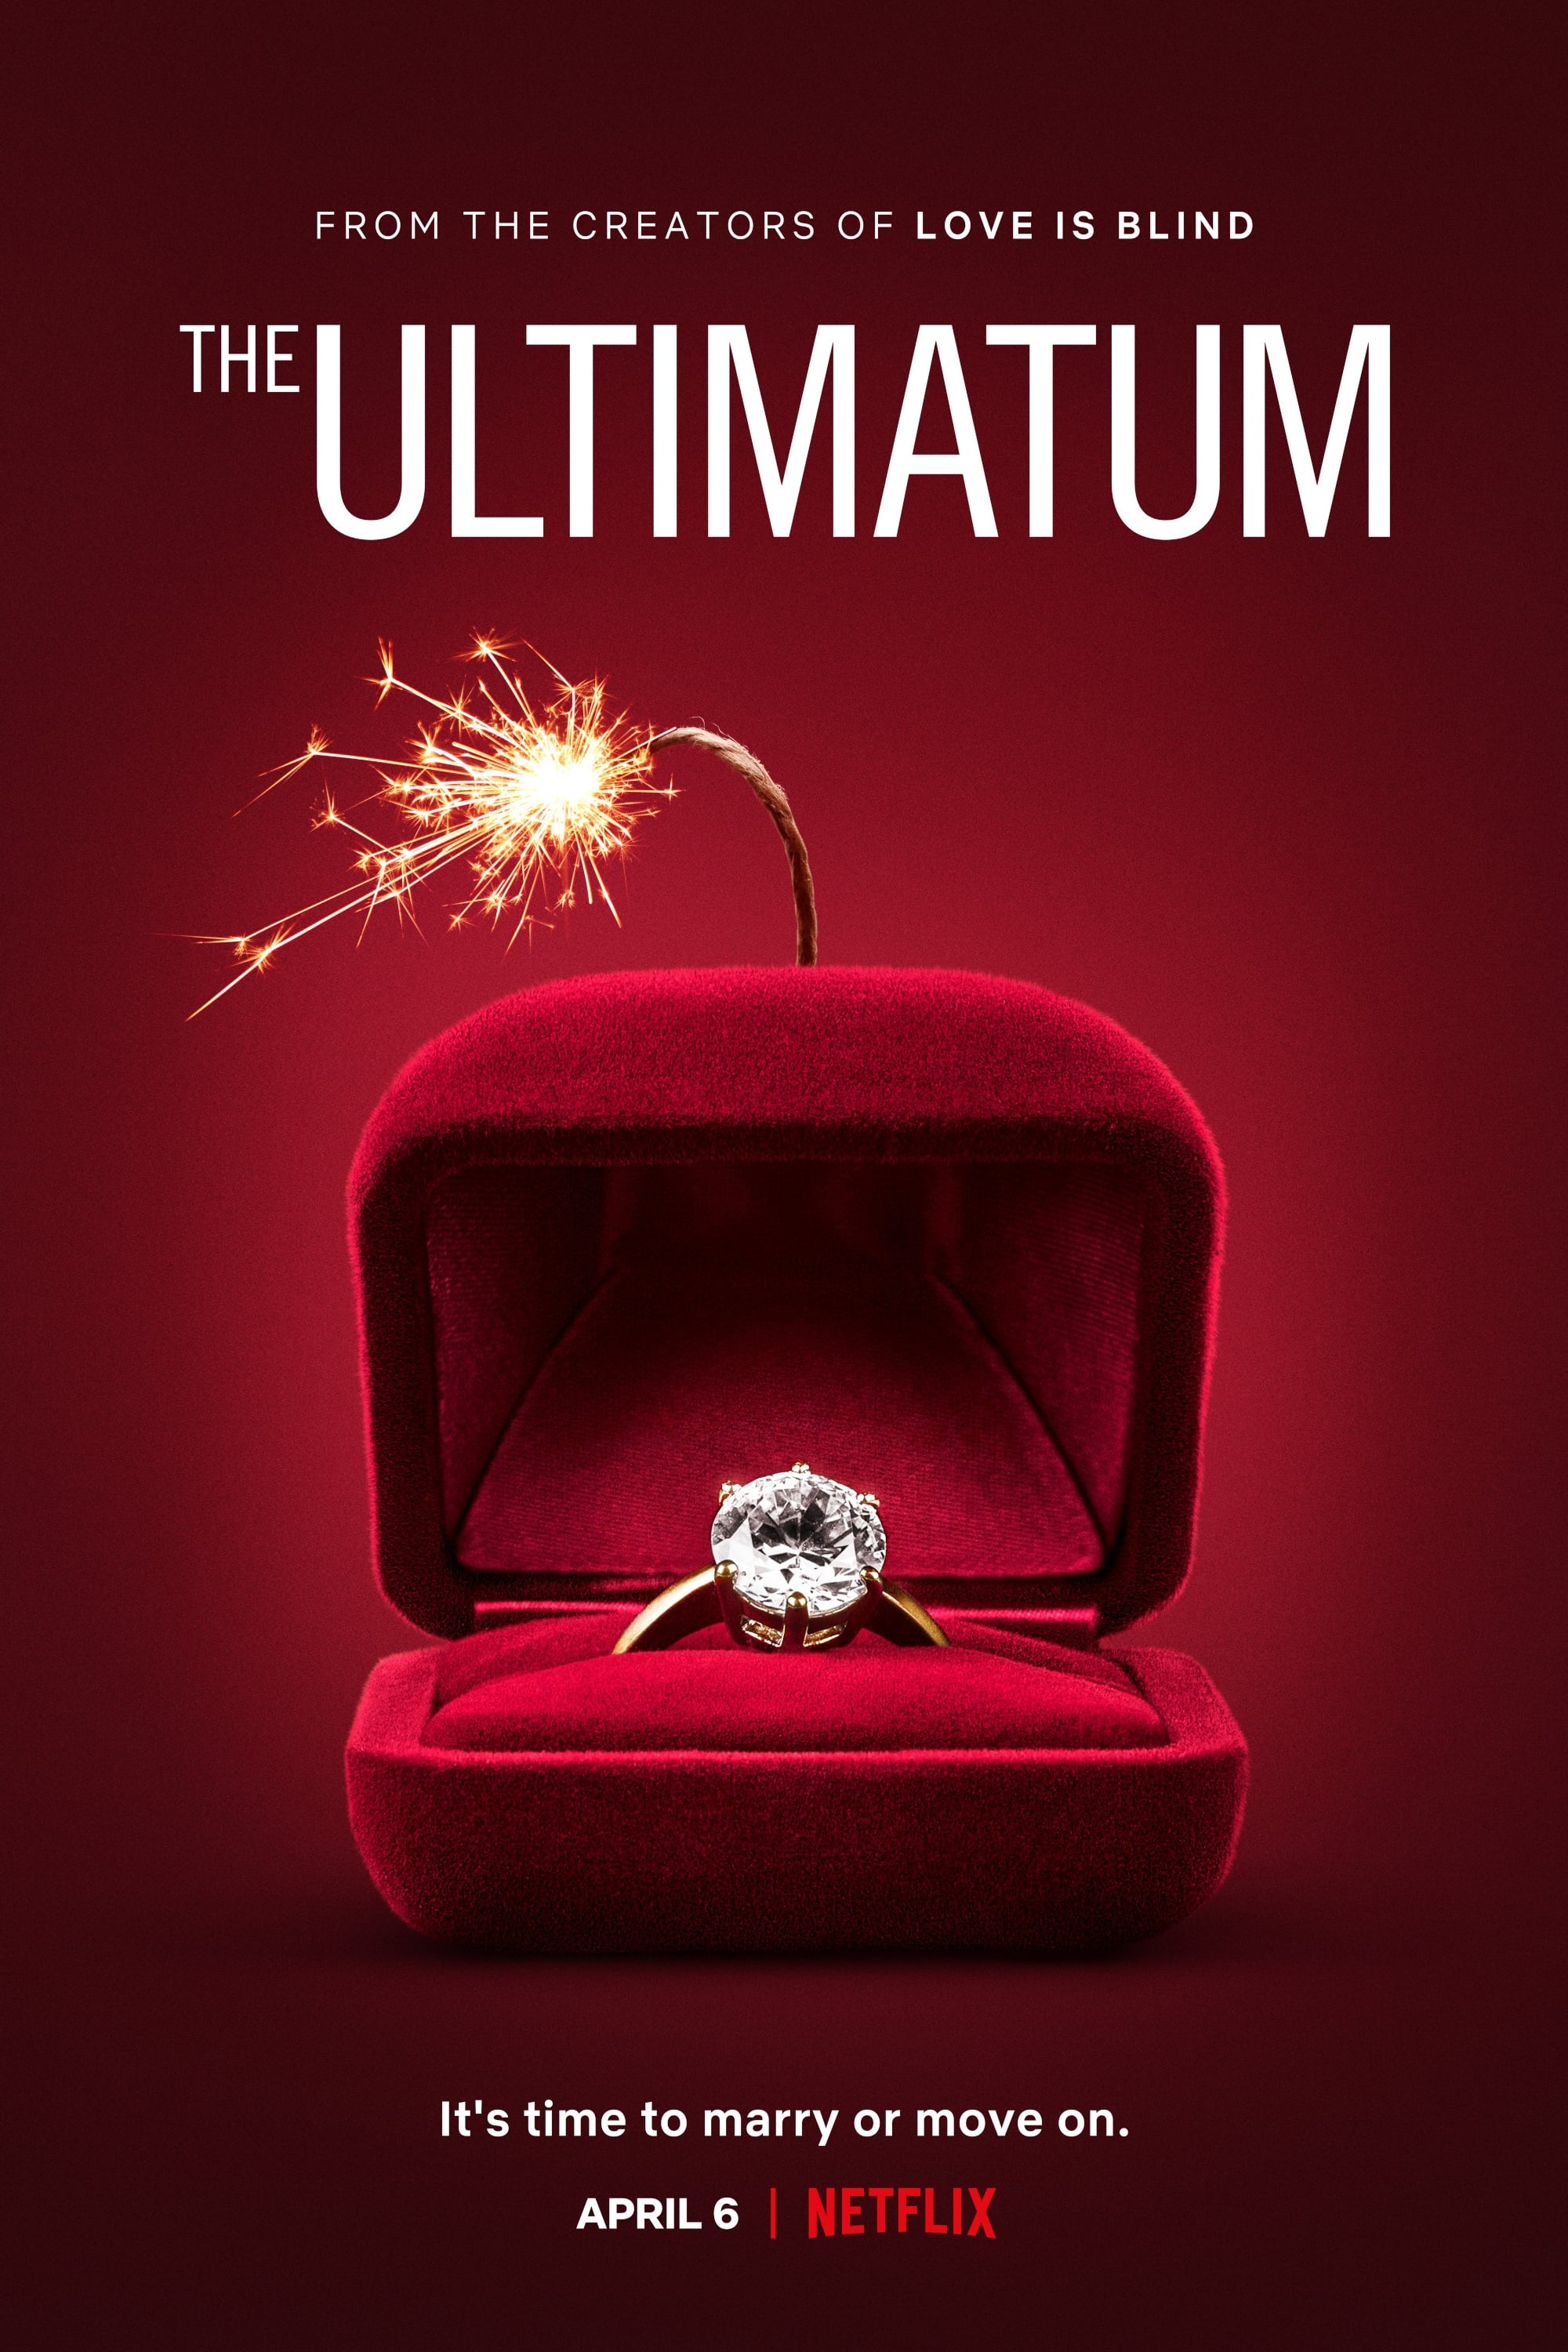 The Ultimatum: Marry or Move On TV Shows About Dating